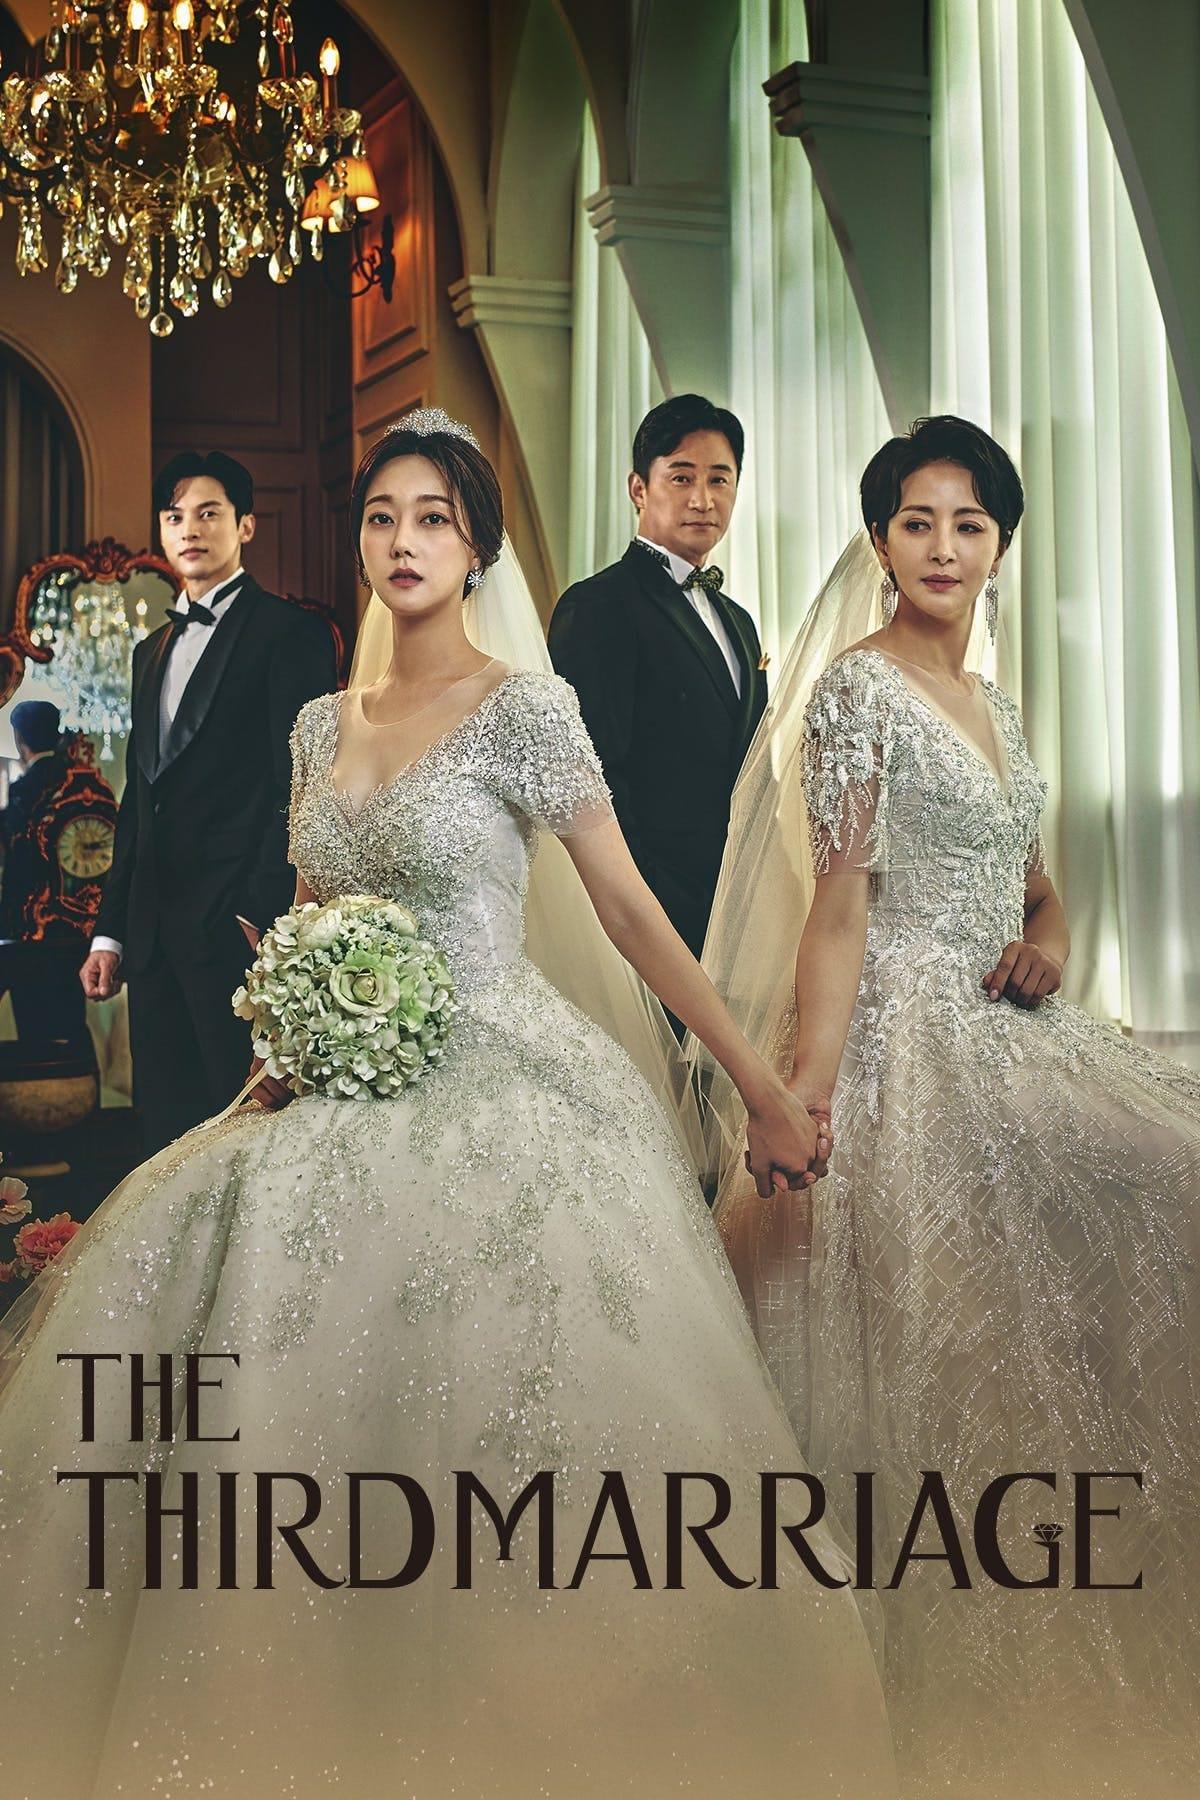 The Third Marriage poster